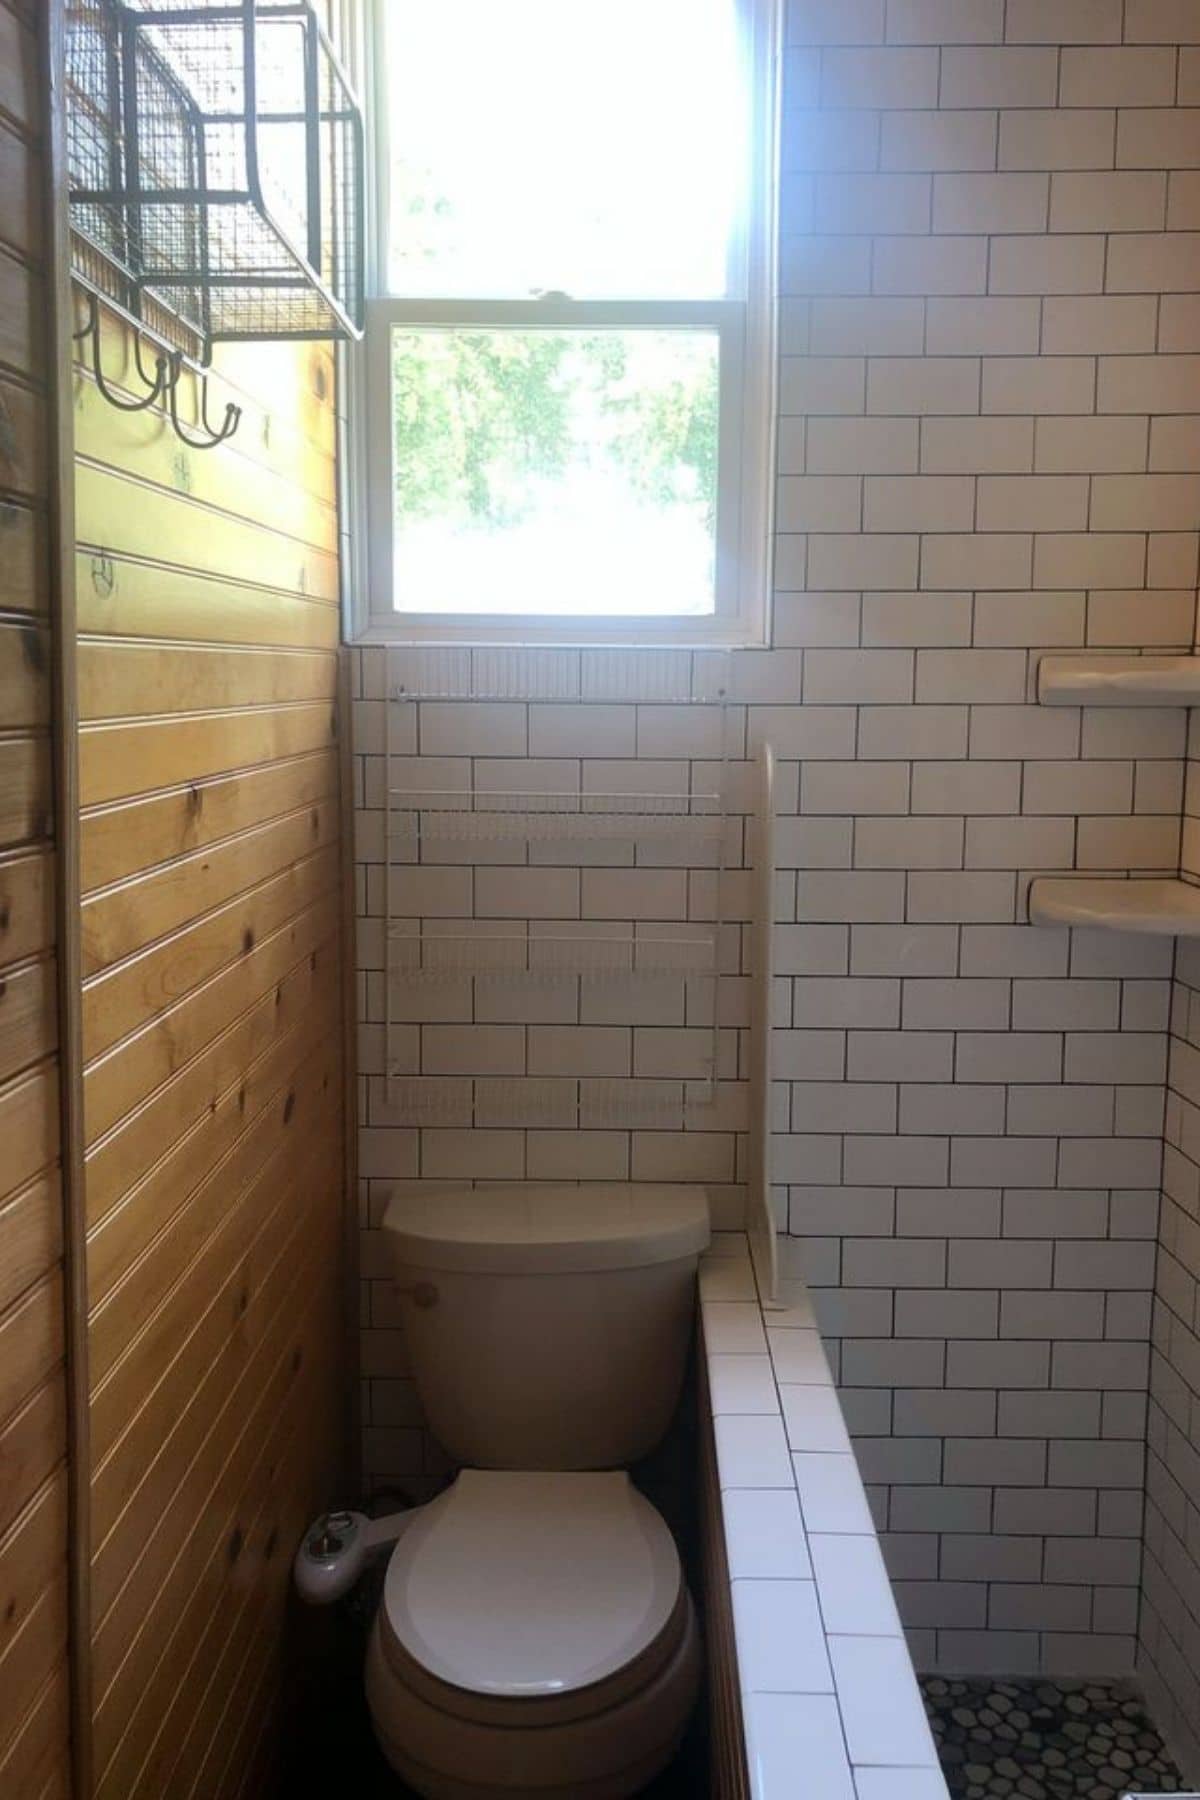 White tiled bathroom wall with flush toilet and wood wall on left